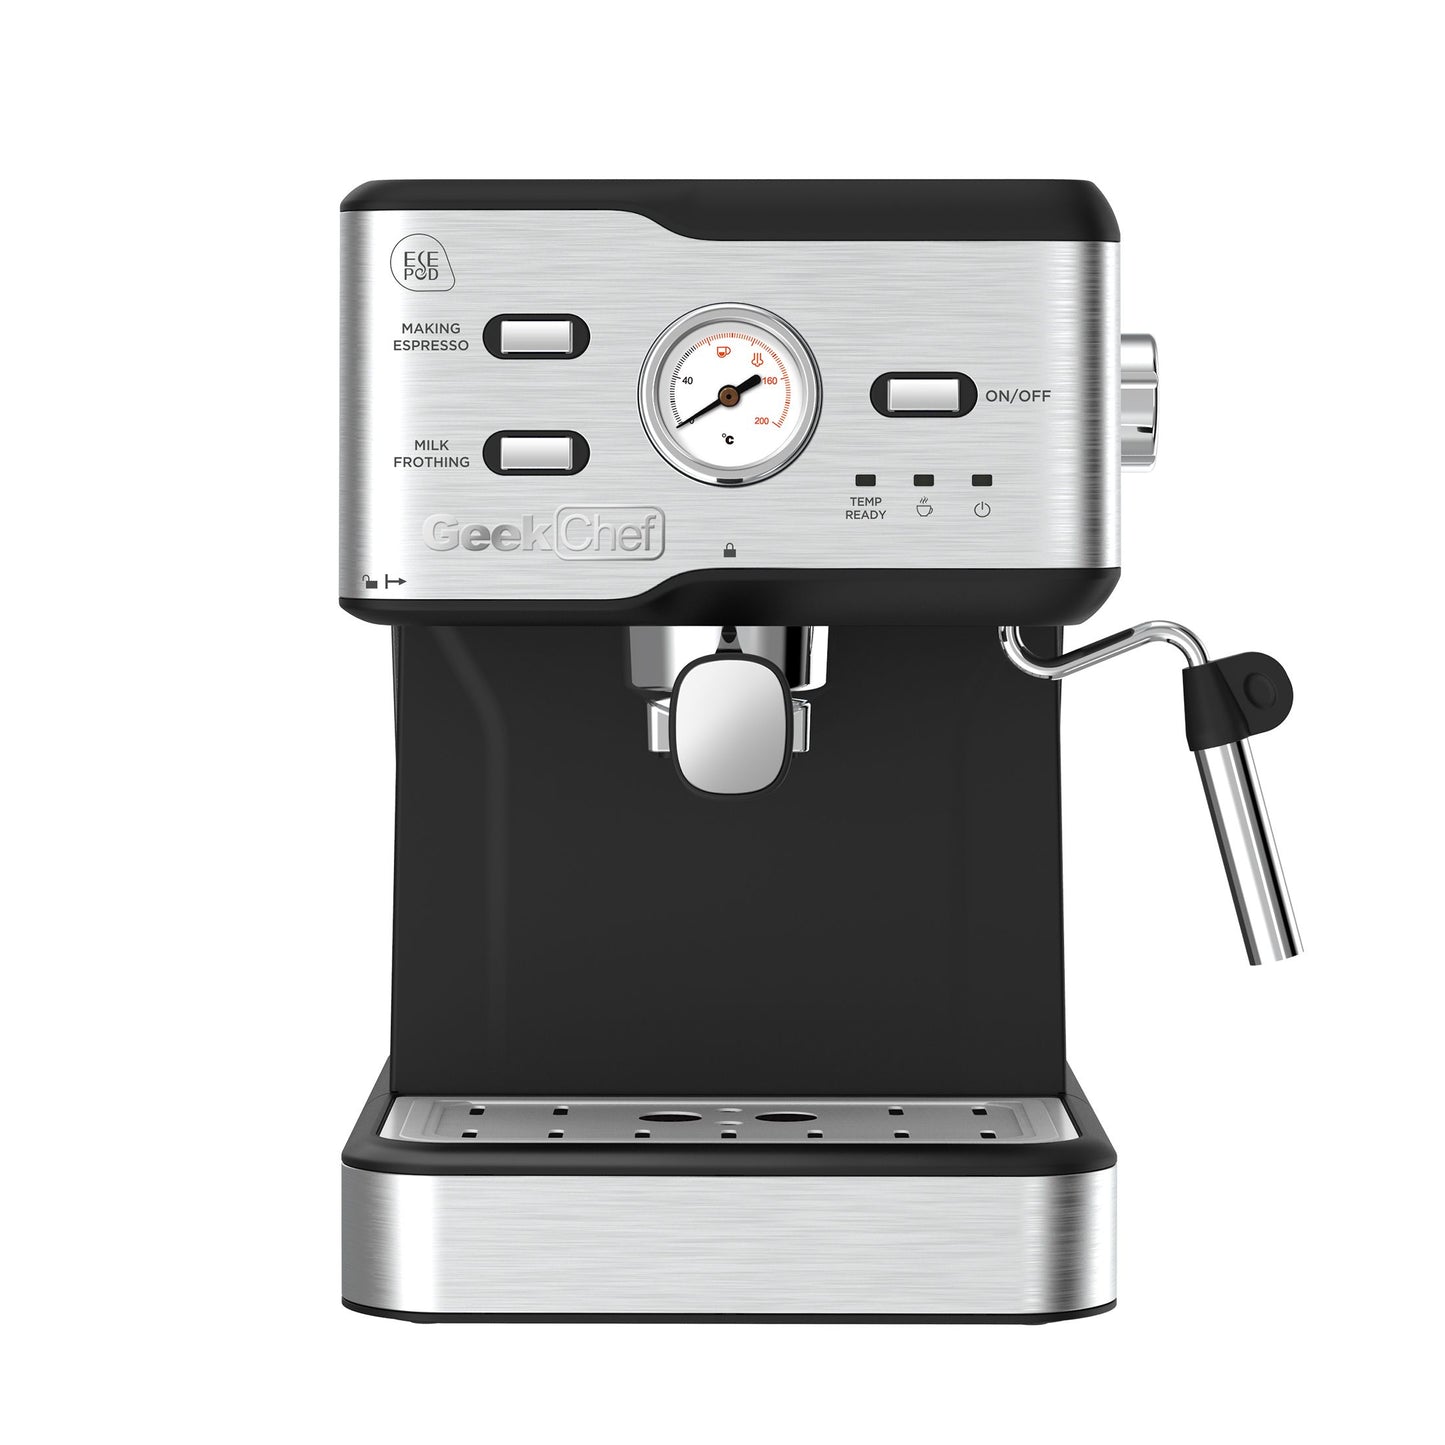 Espresso Machine 20 Bar Pump Pressure Cappuccino Latte Maker Coffee Machine With ESE POD Filter&Milk Frother Steam Wand&thermometer, 1.5L Water Tank, Stainless Steel Espresso Ban On Amazon